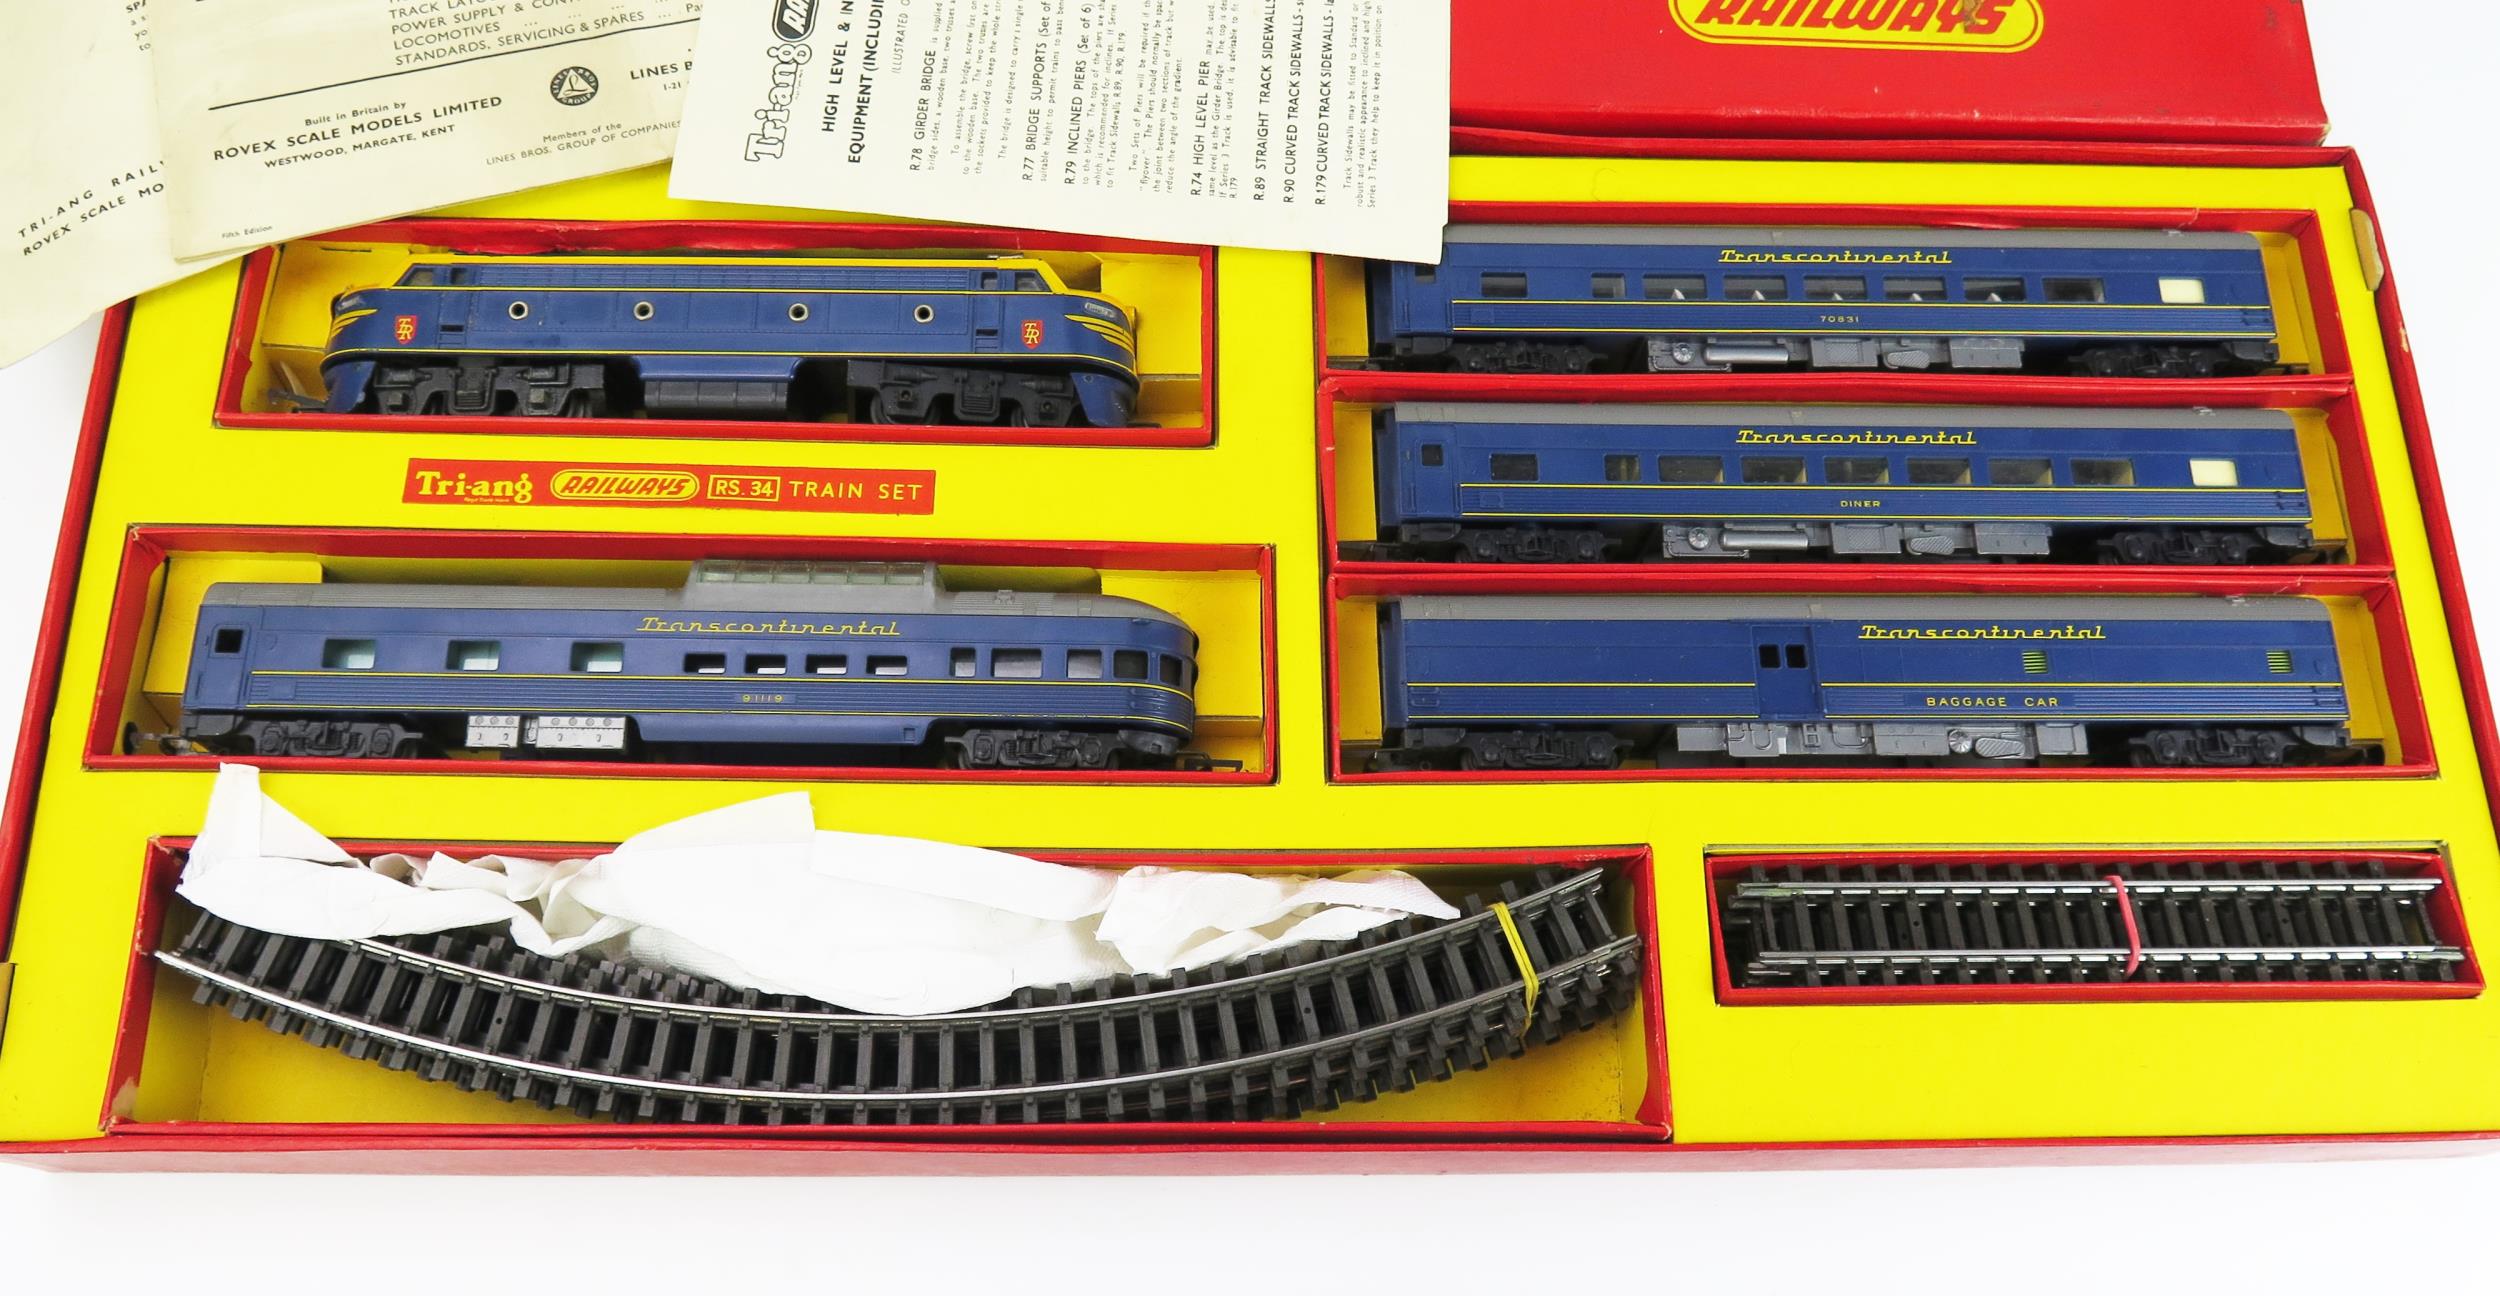 Triang Railways OO Gauge RS34 Transcontinental Passenger Train Set in blue/yellow with Double - Image 2 of 2